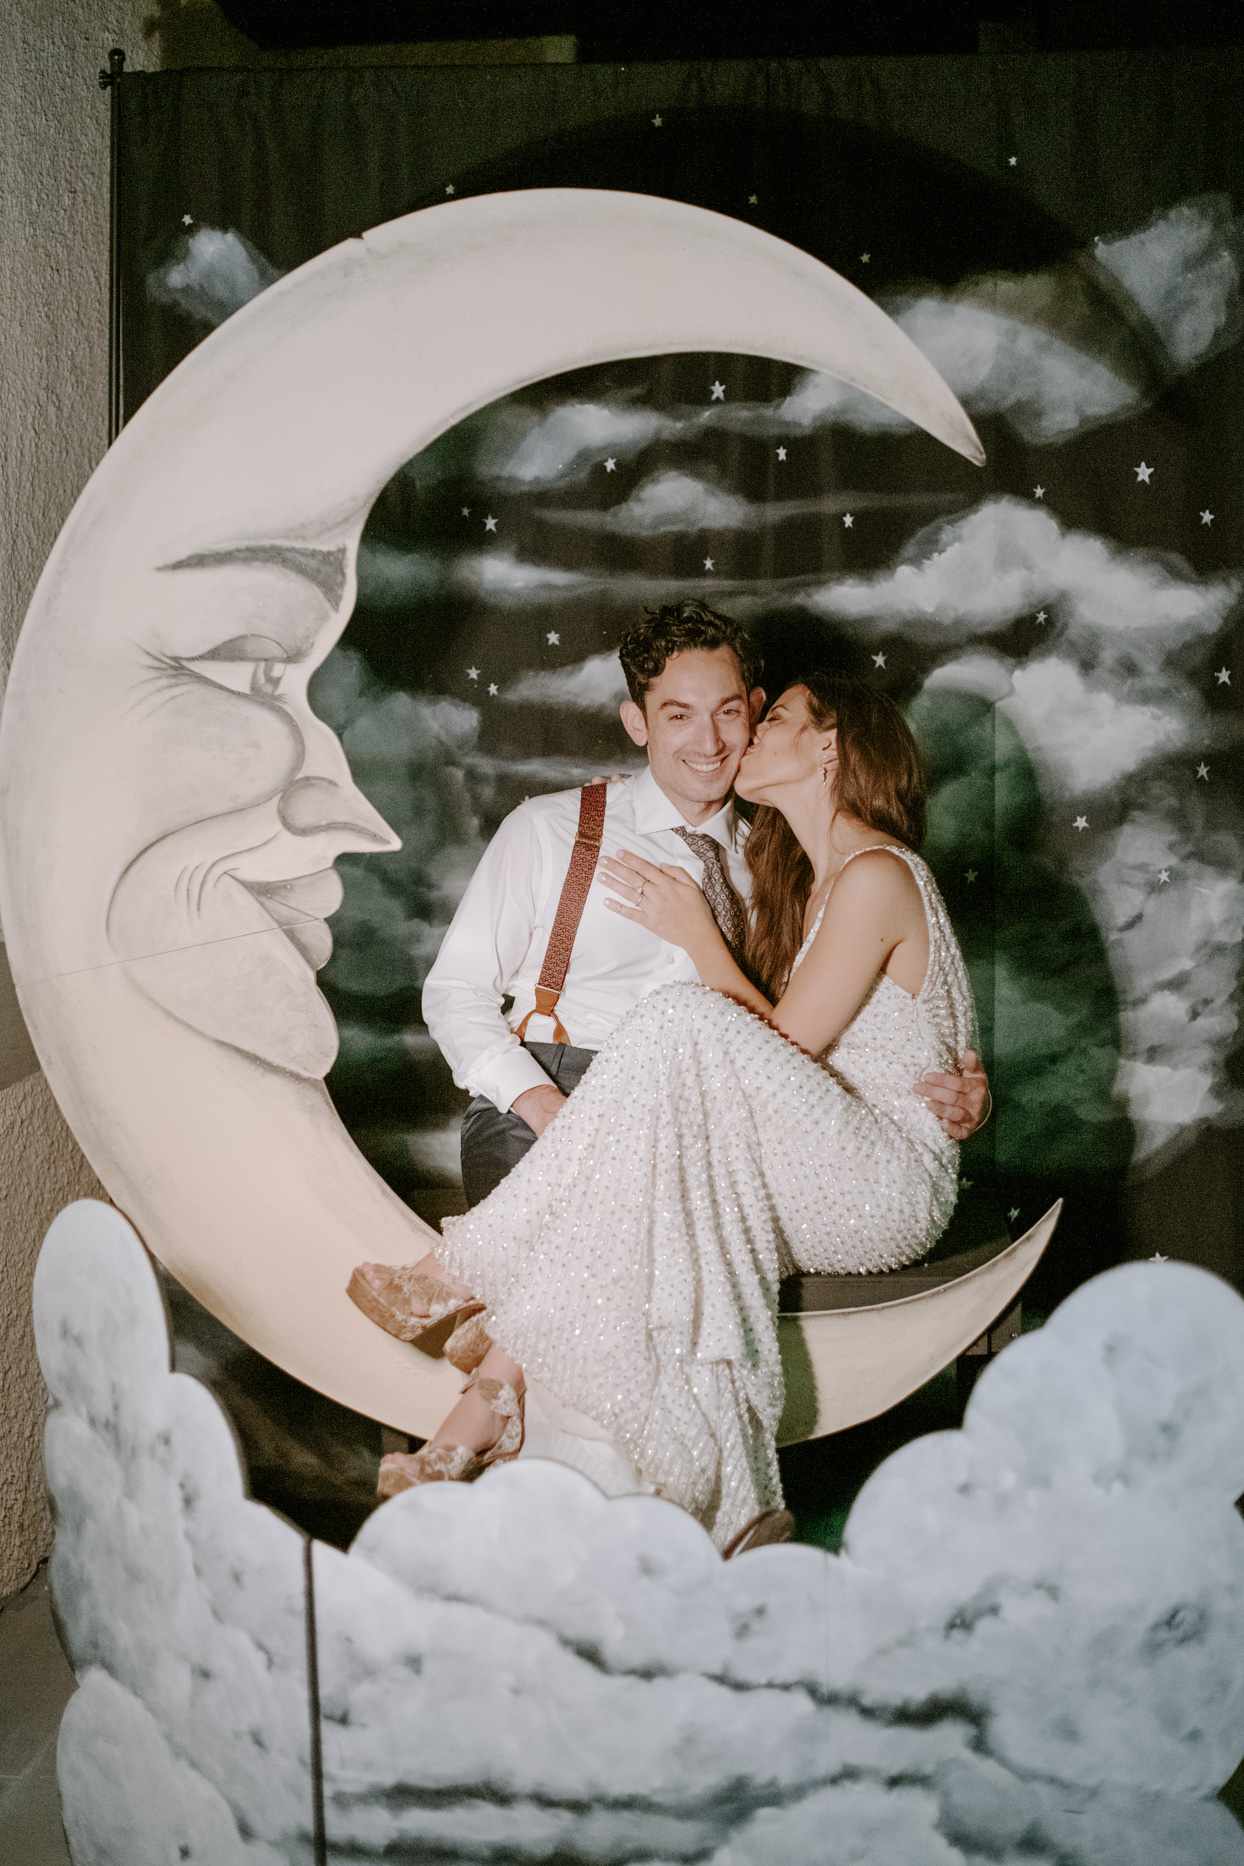 wedding couple posing together against moon backdrop